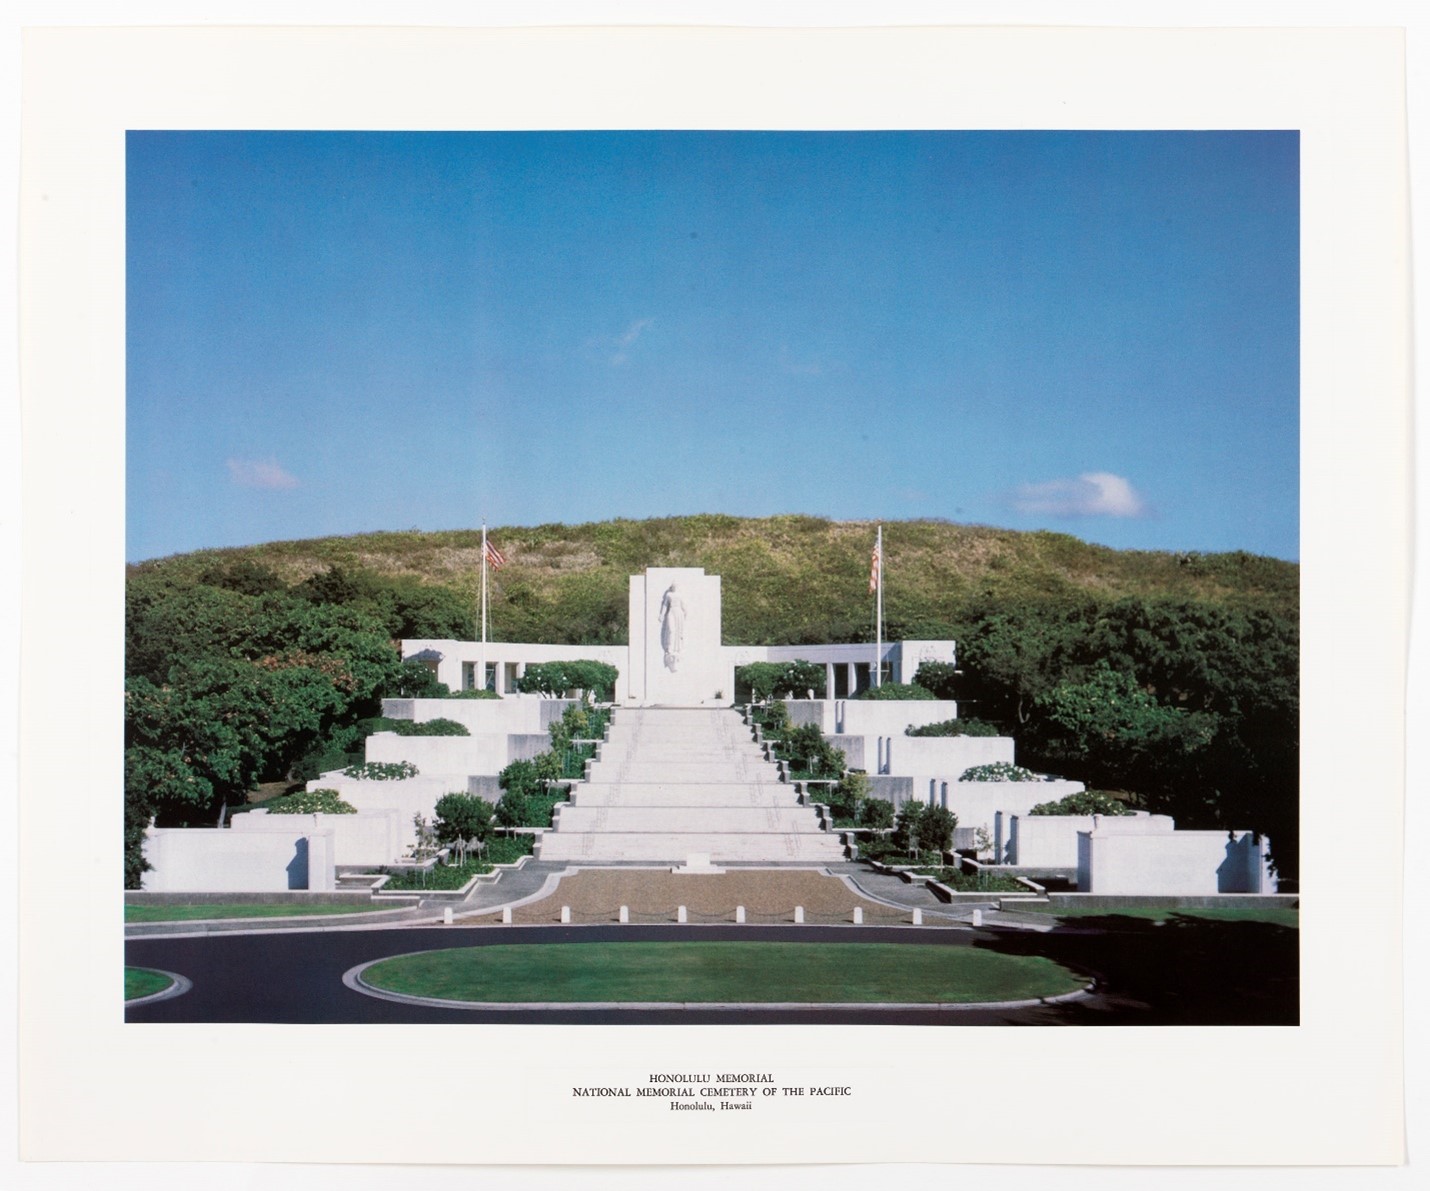 Honolulu Memorial in the National Memorial Cemetery of the Pacific